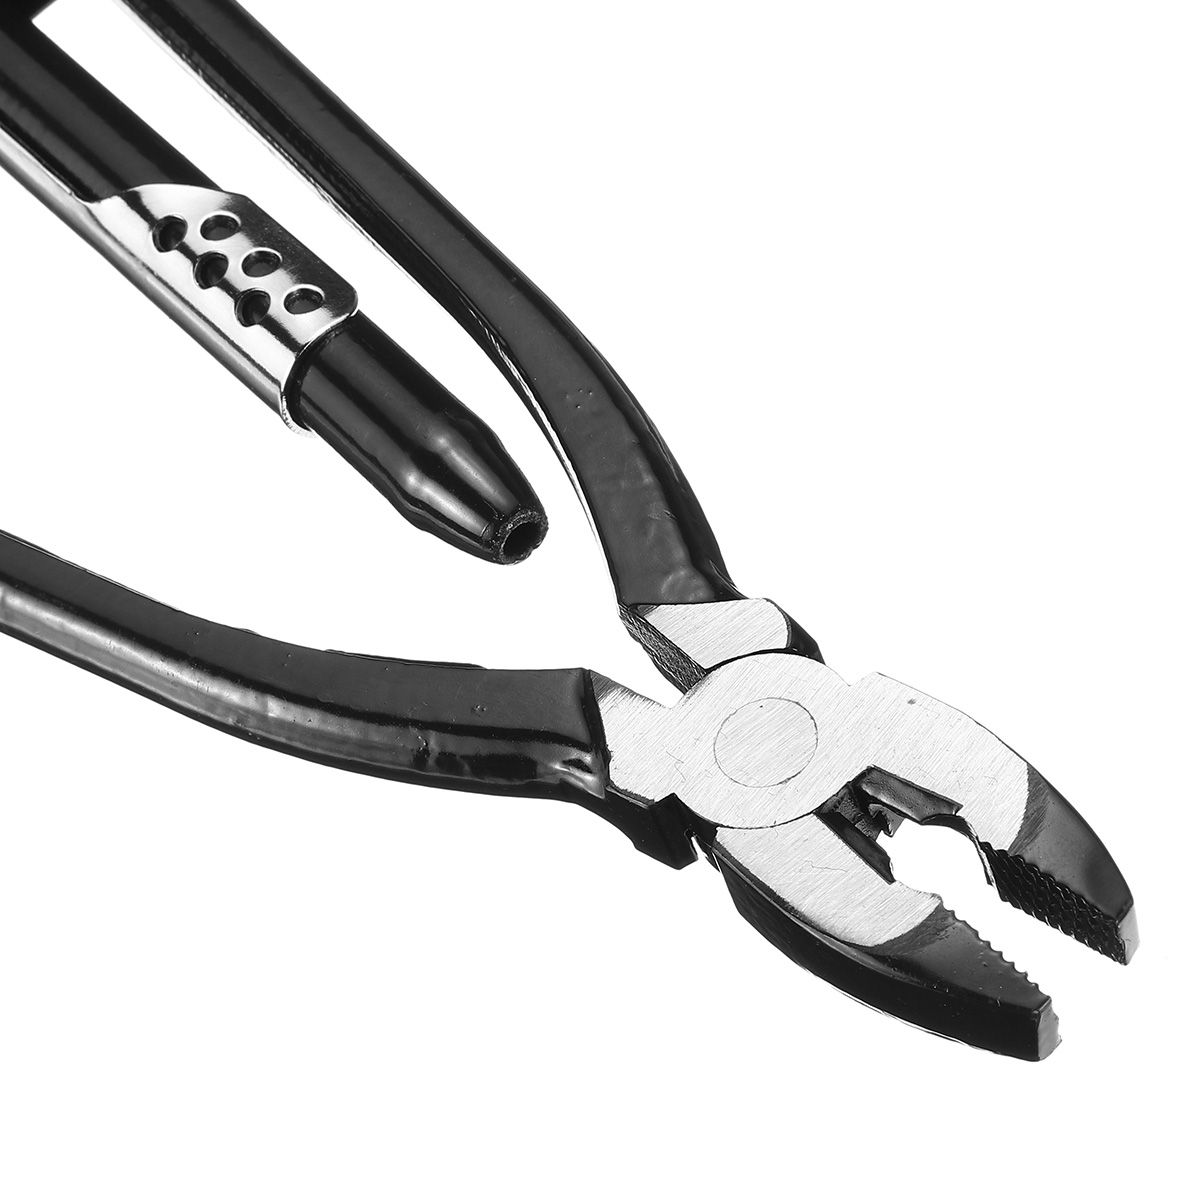 9inch-6inch-Aircraft-Safety-Wire-Twisting-Wiring-Lock-Pliers-Tool-Electrical-1574166